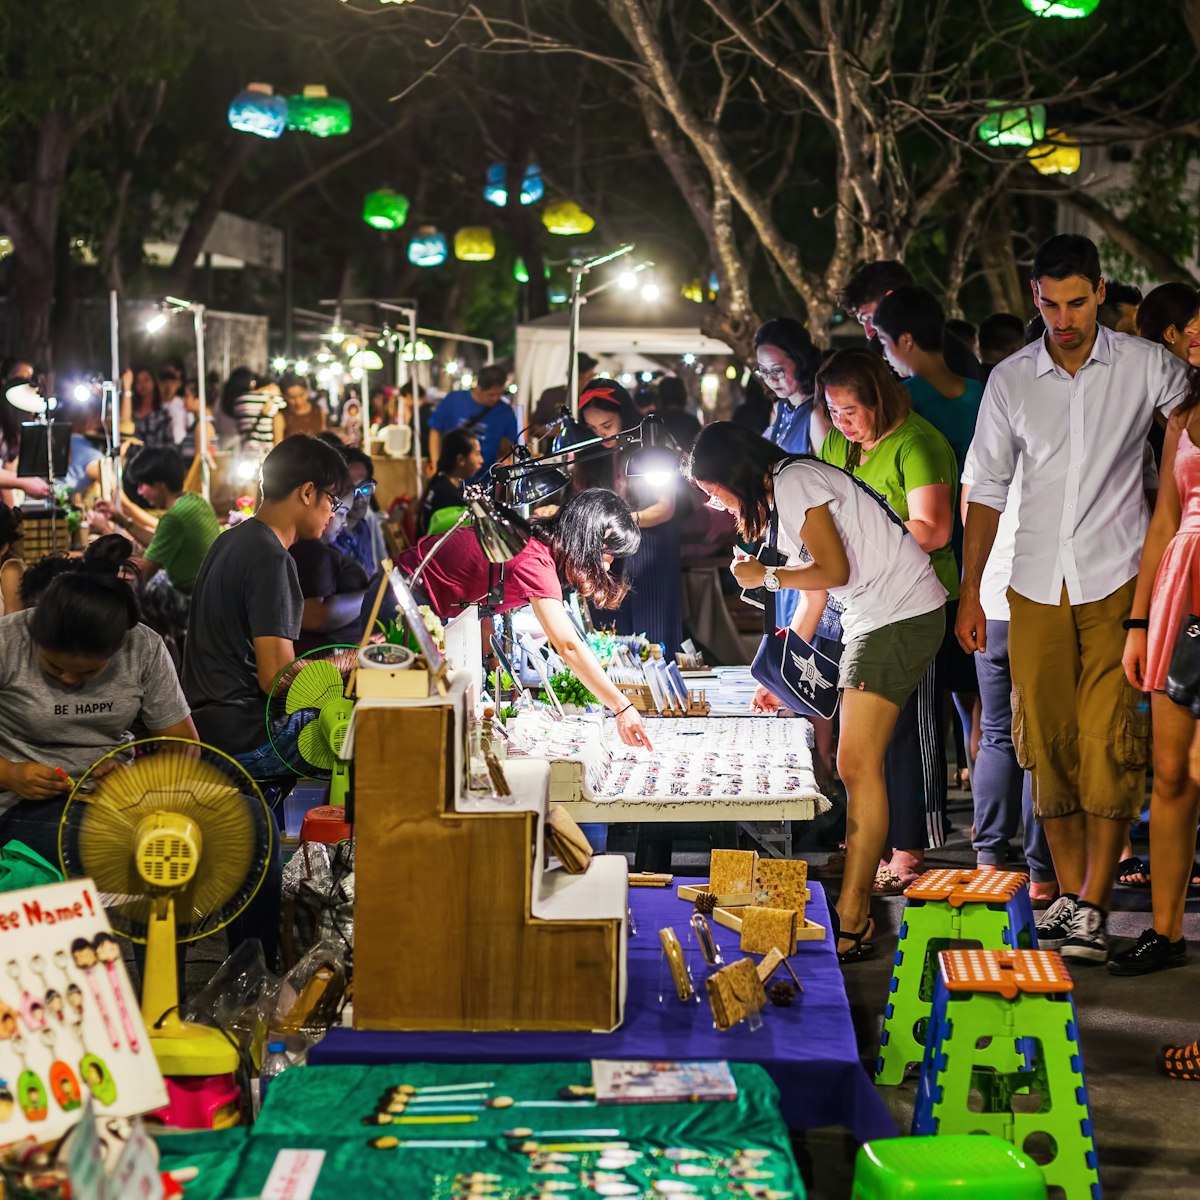 Cicada Night Market in Hua Hin, a popular night market selling goods ranging from clothes to desserts.